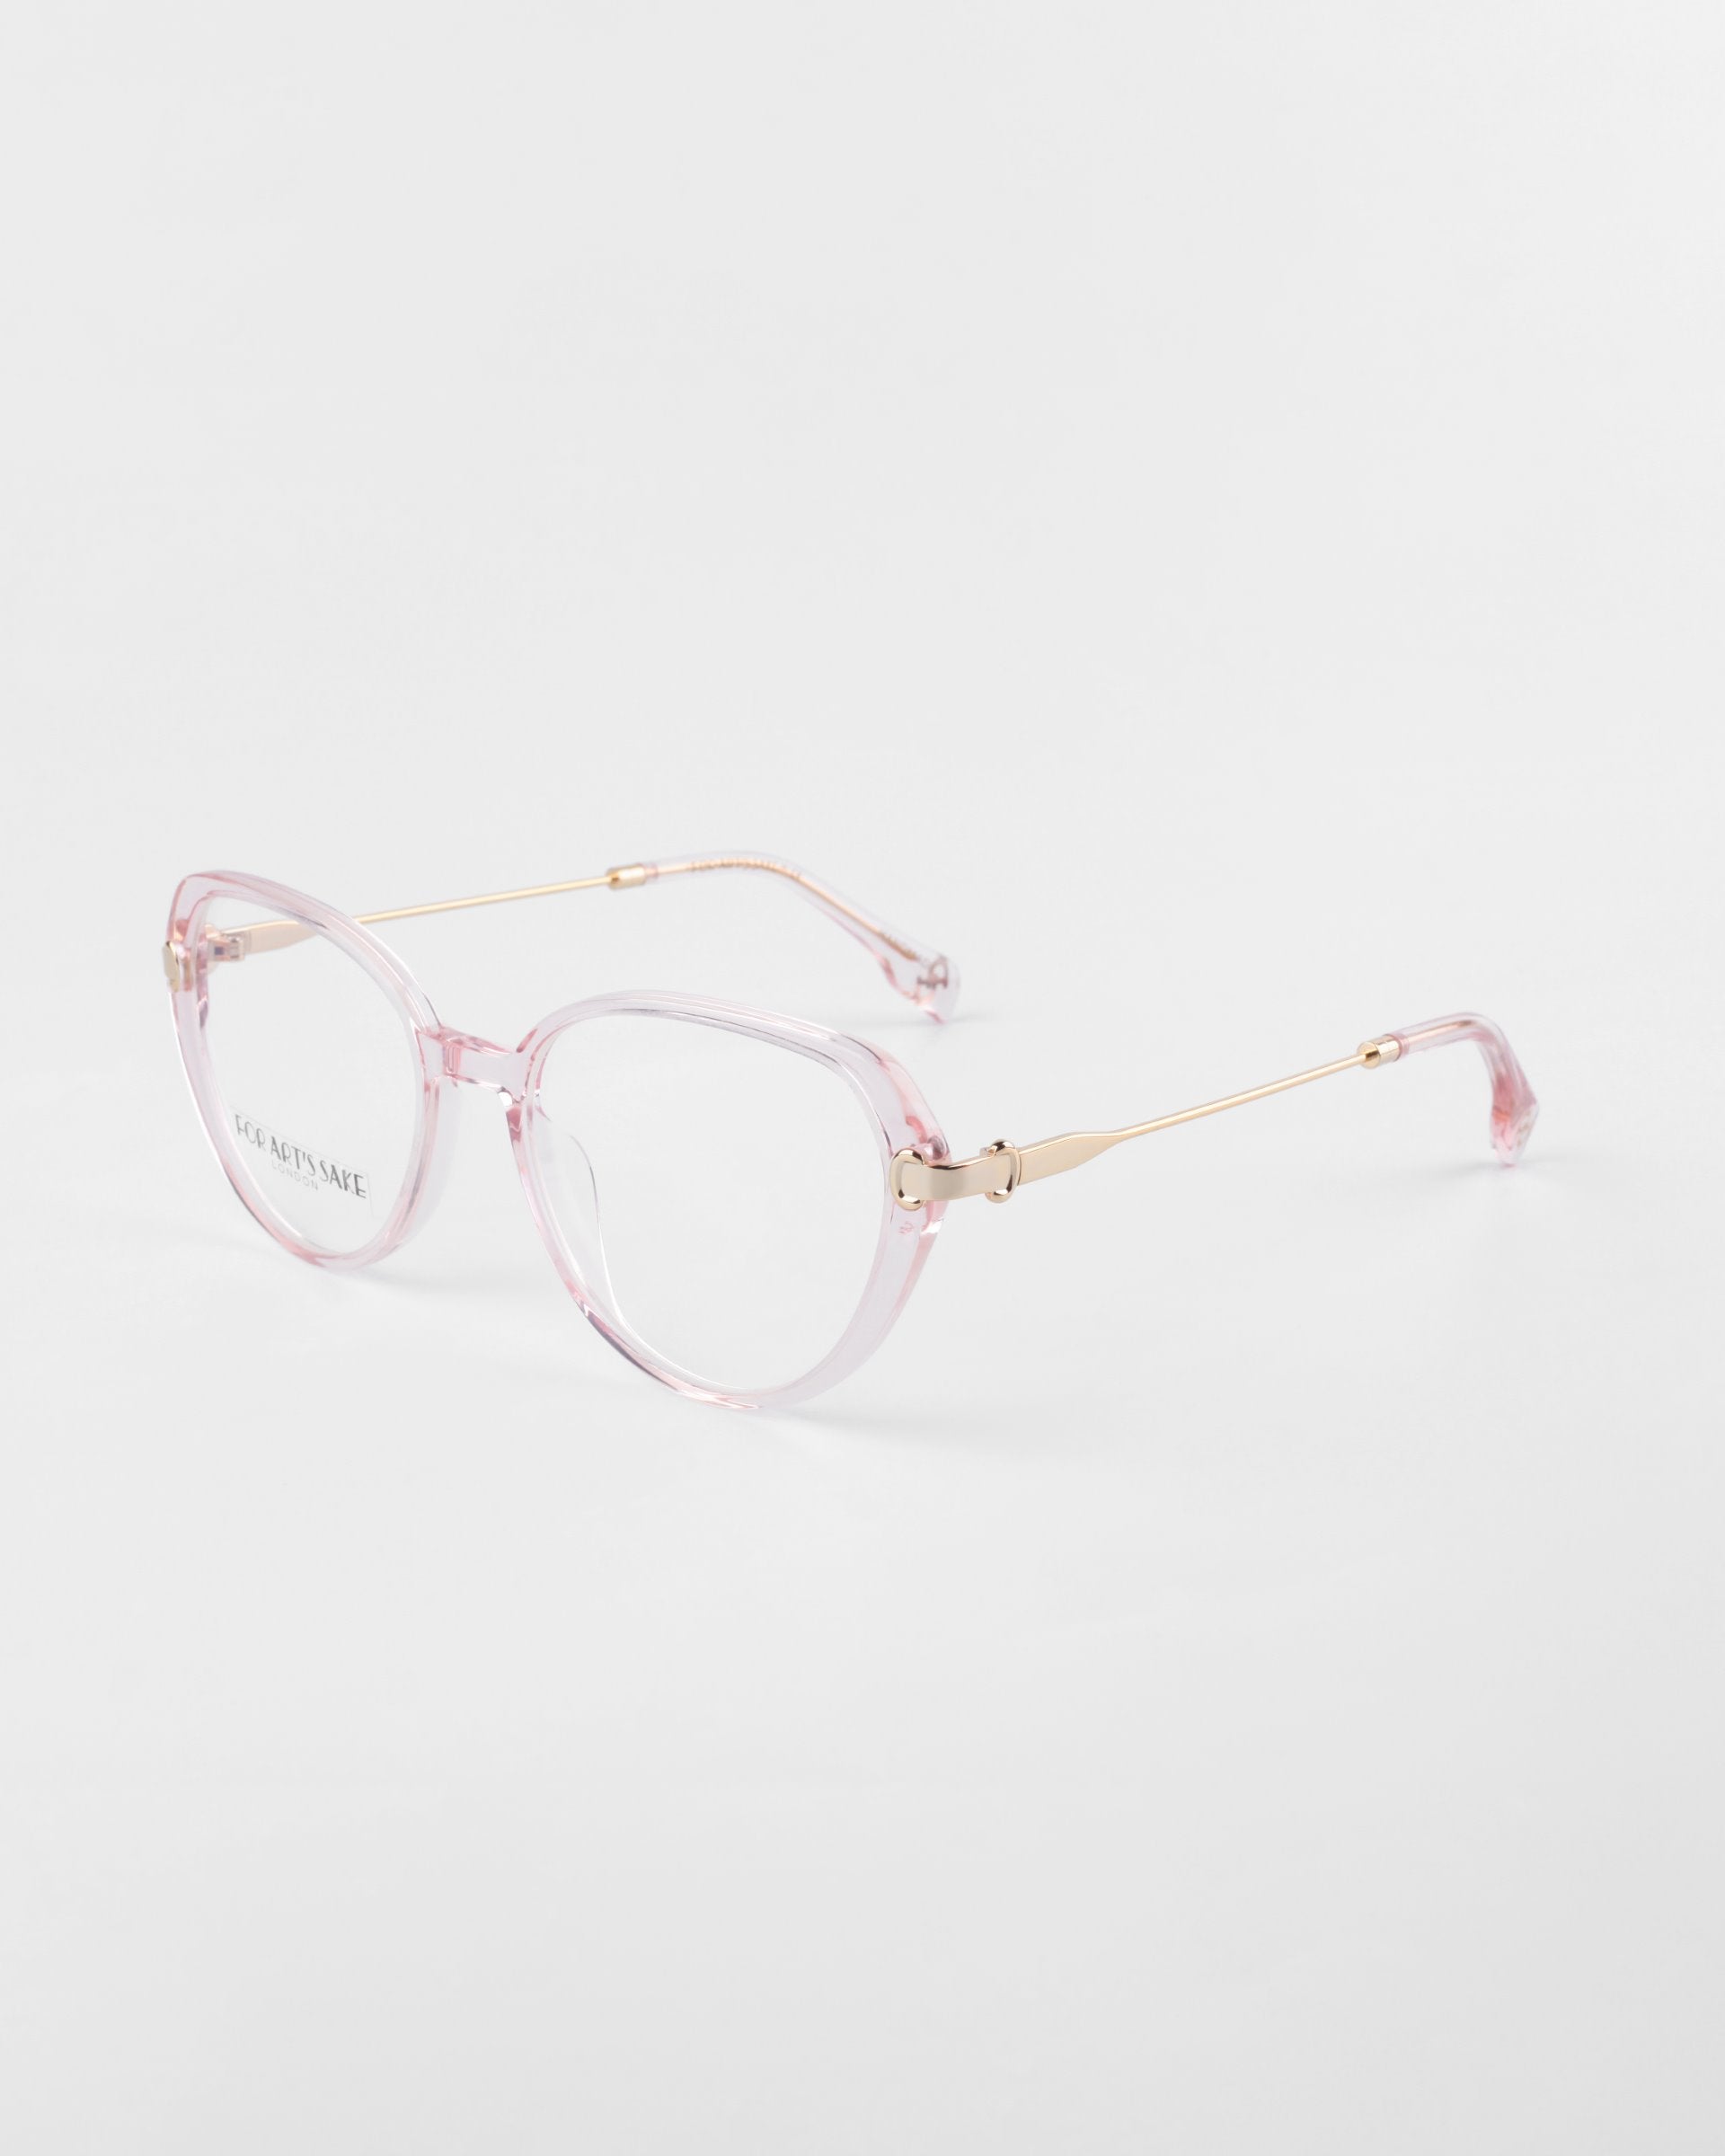 A pair of fashionable eyeglasses with light pink-colored, transparent rectangular frames and thin 18-karat gold-plated metal temples. The brand name &quot;For Art&#39;s Sake®&quot; is printed on the left lens. For modern users, the prescription lenses include a blue light filter. The glasses are set against a plain white background.

Product Name: Waterhouse